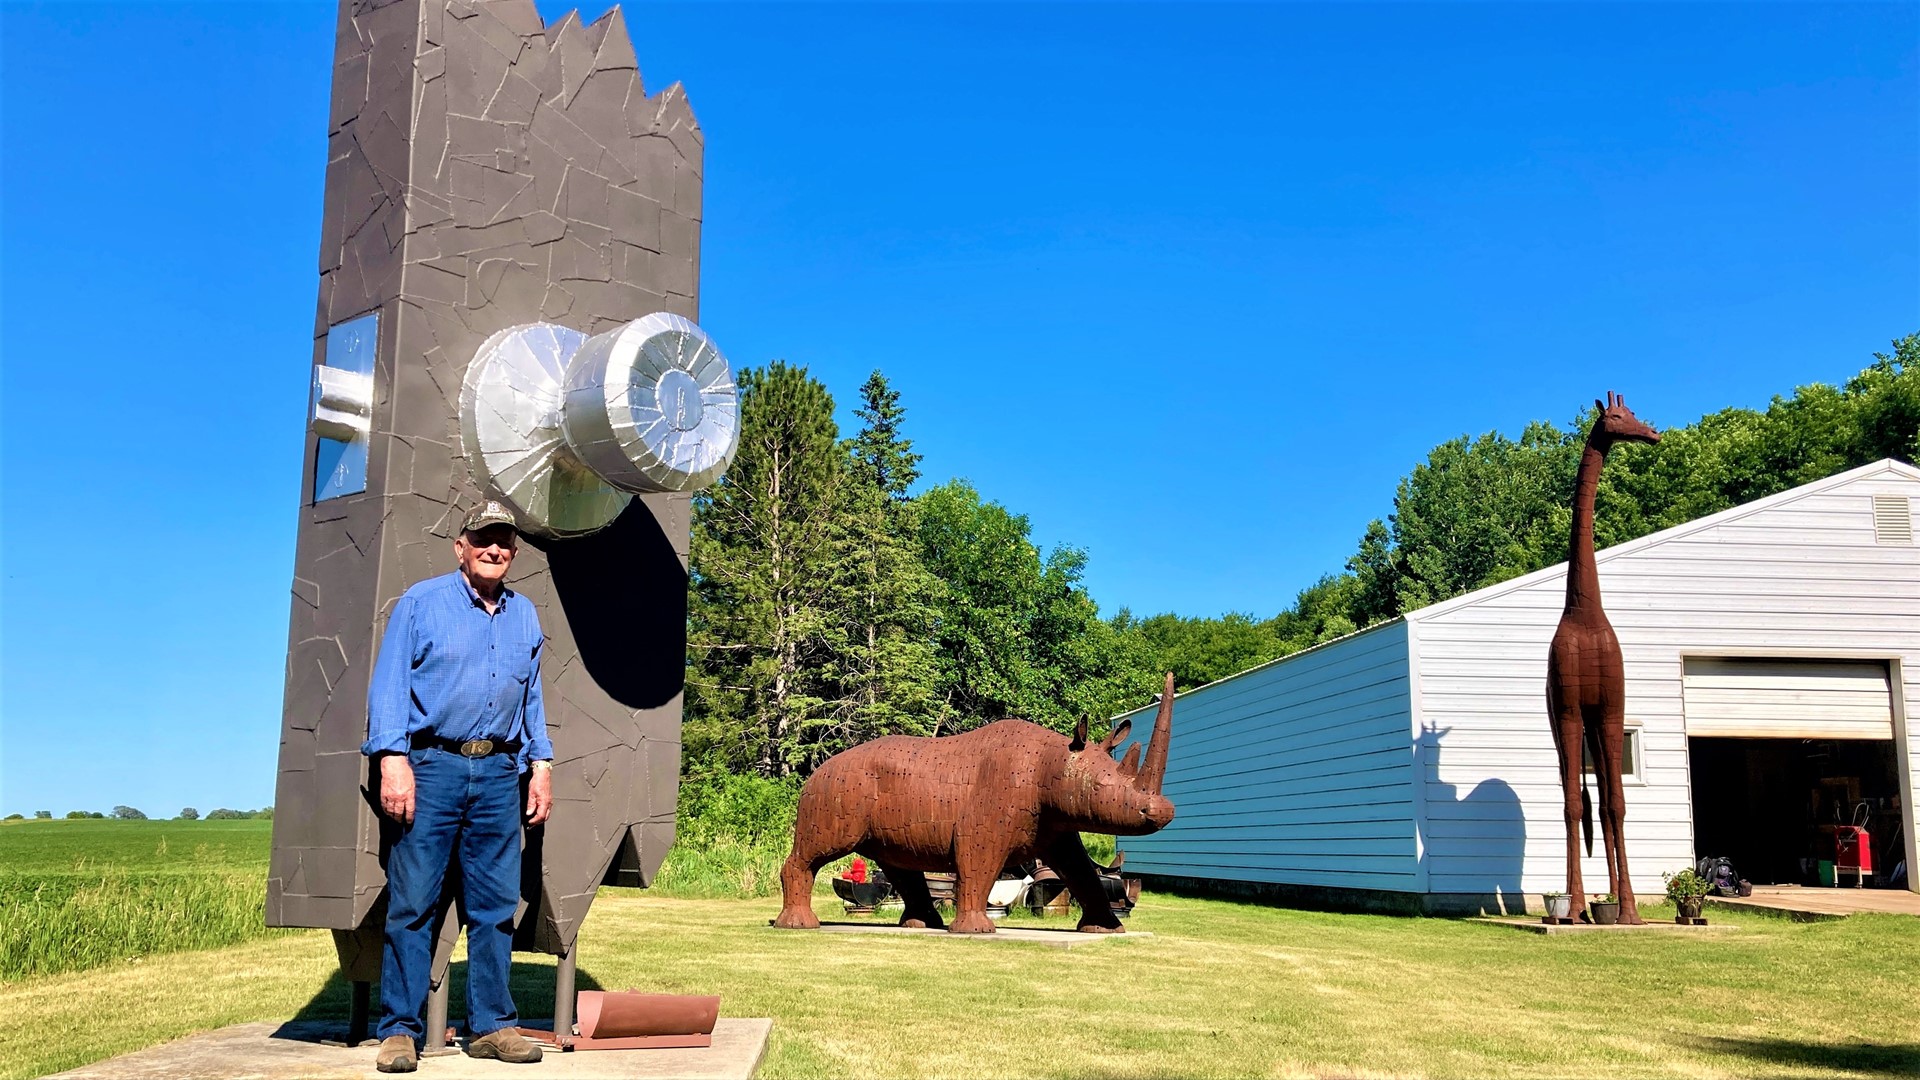 83-year-old Ken Nyberg has peppered Vining, Minnesota with dozens of metal sculptures.